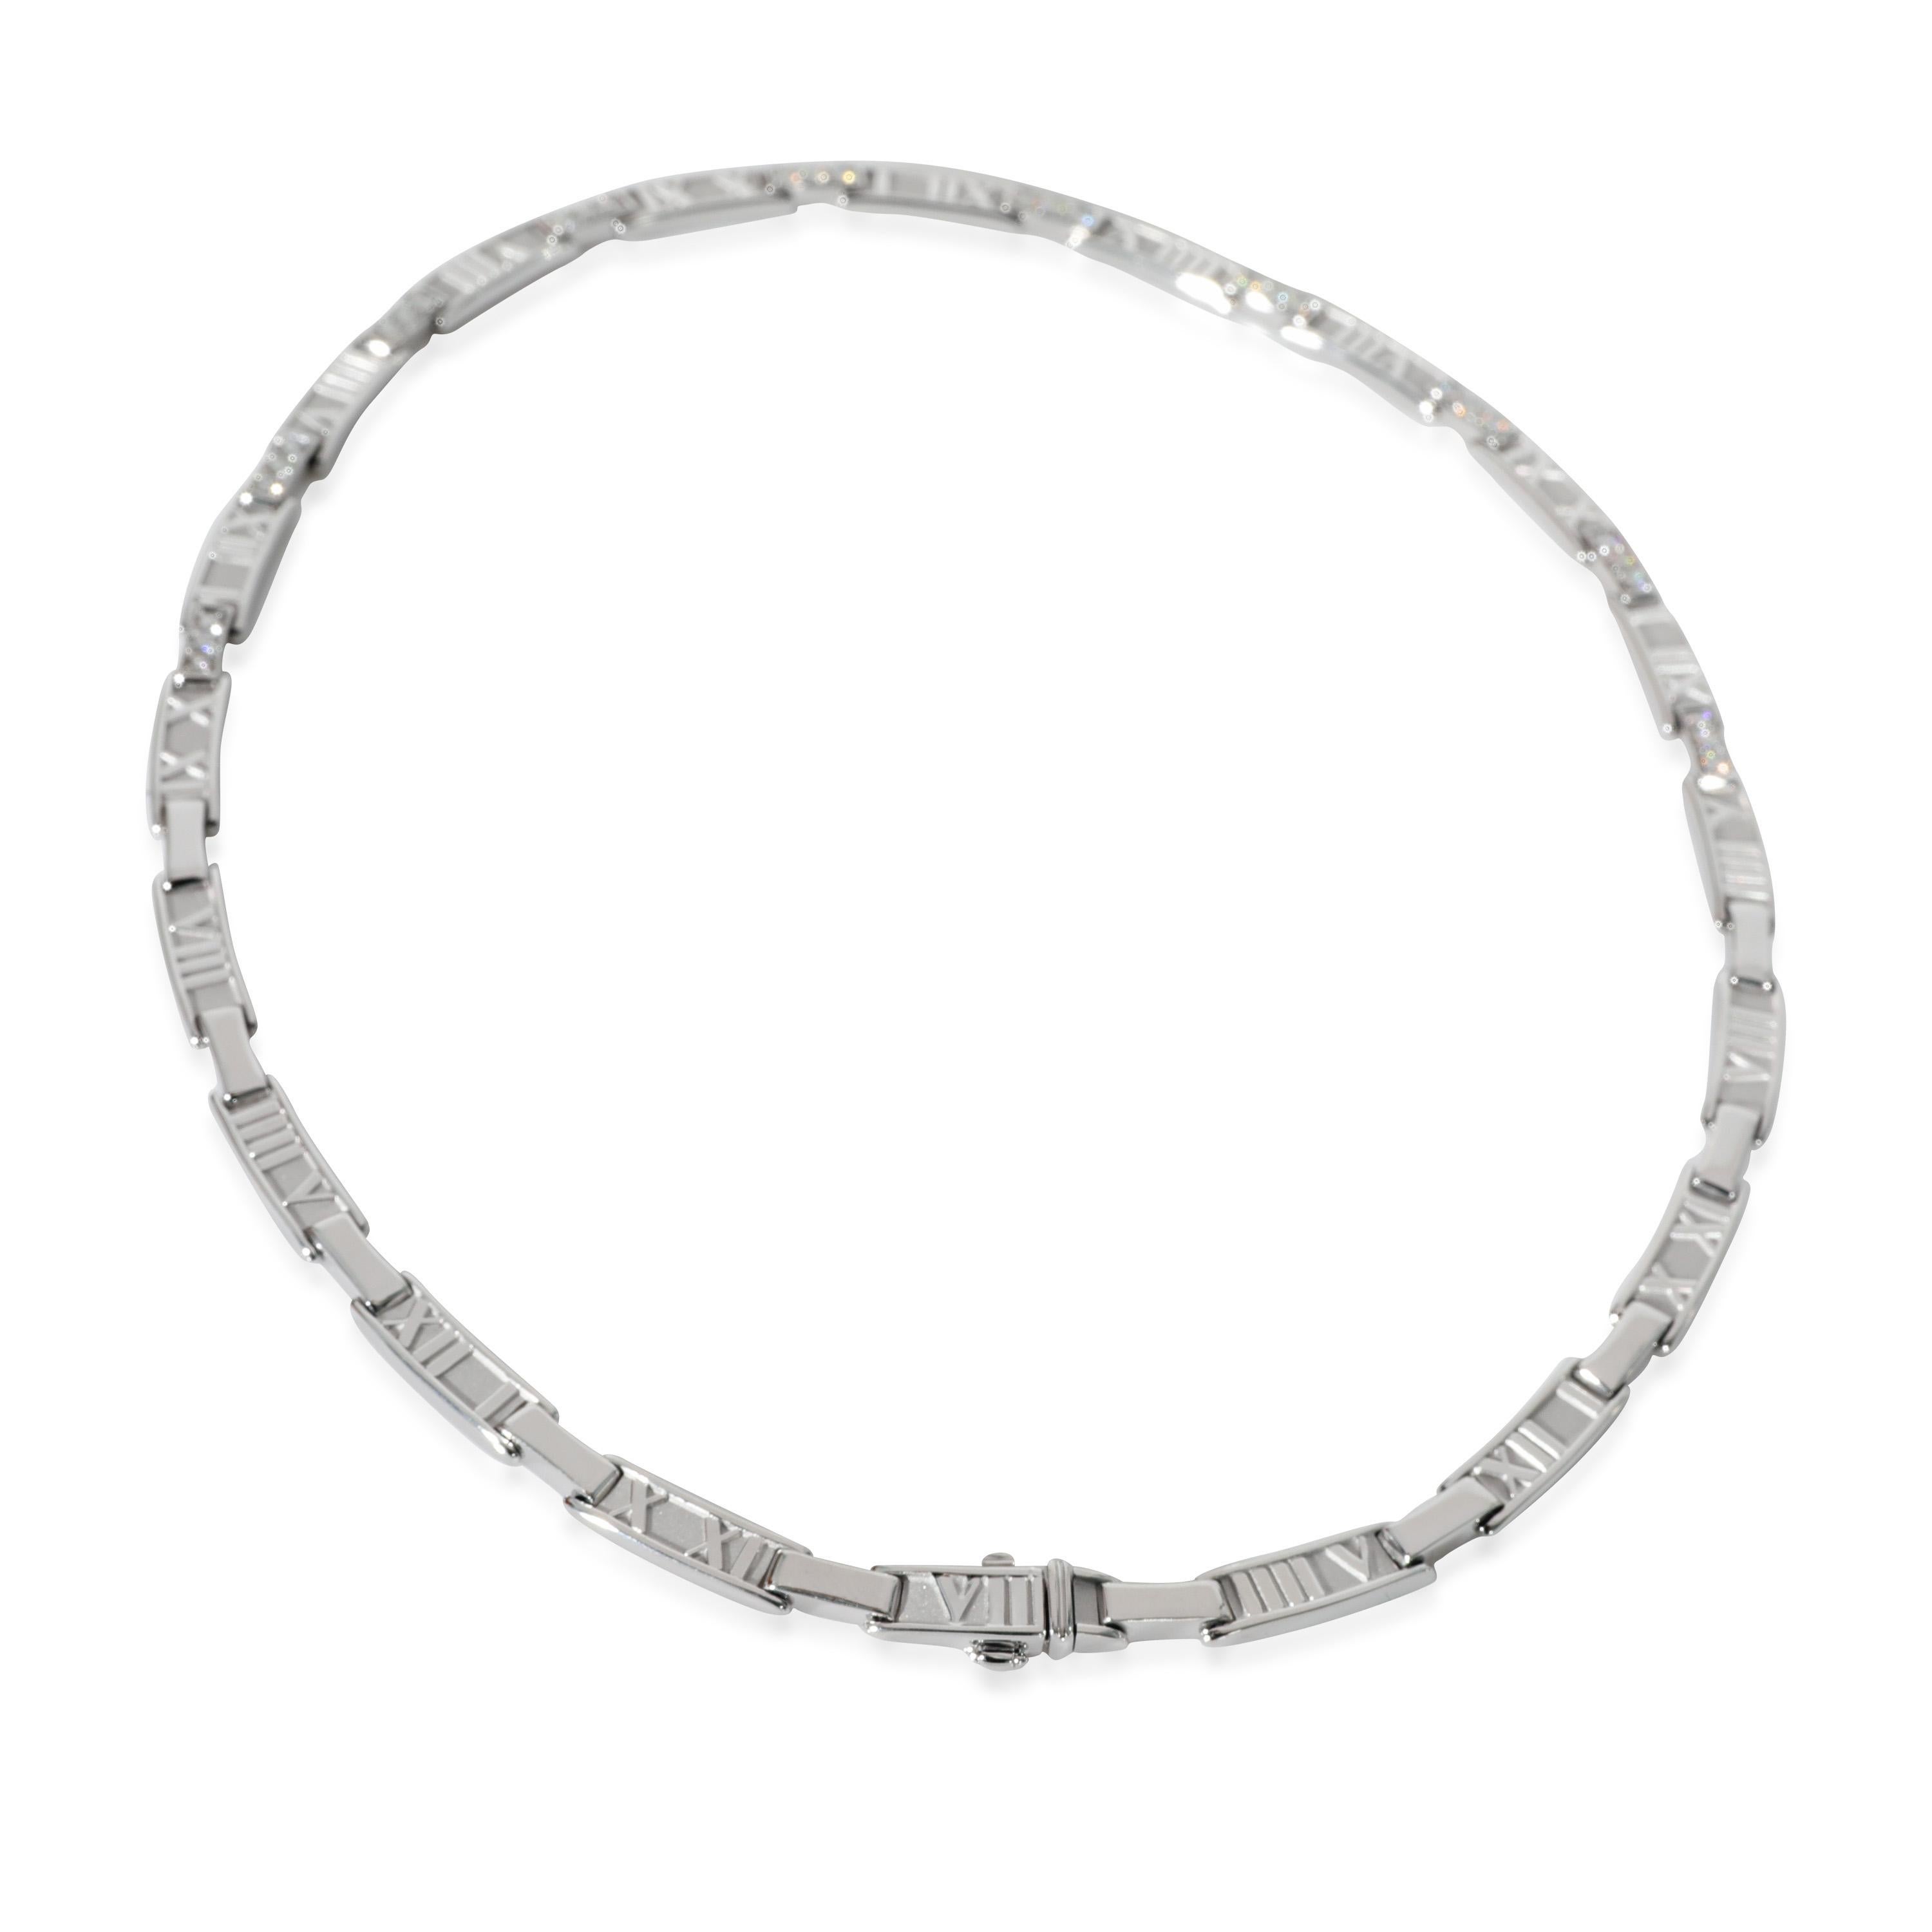 Tiffany & Co. Atlas Diamond Collar Necklace in 18k White Gold 1.5 CTW

PRIMARY DETAILS
SKU: 130255
Listing Title: Tiffany & Co. Atlas Diamond Collar Necklace in 18k White Gold 1.5 CTW
Condition Description: Above Tiffany's New York flagship store is